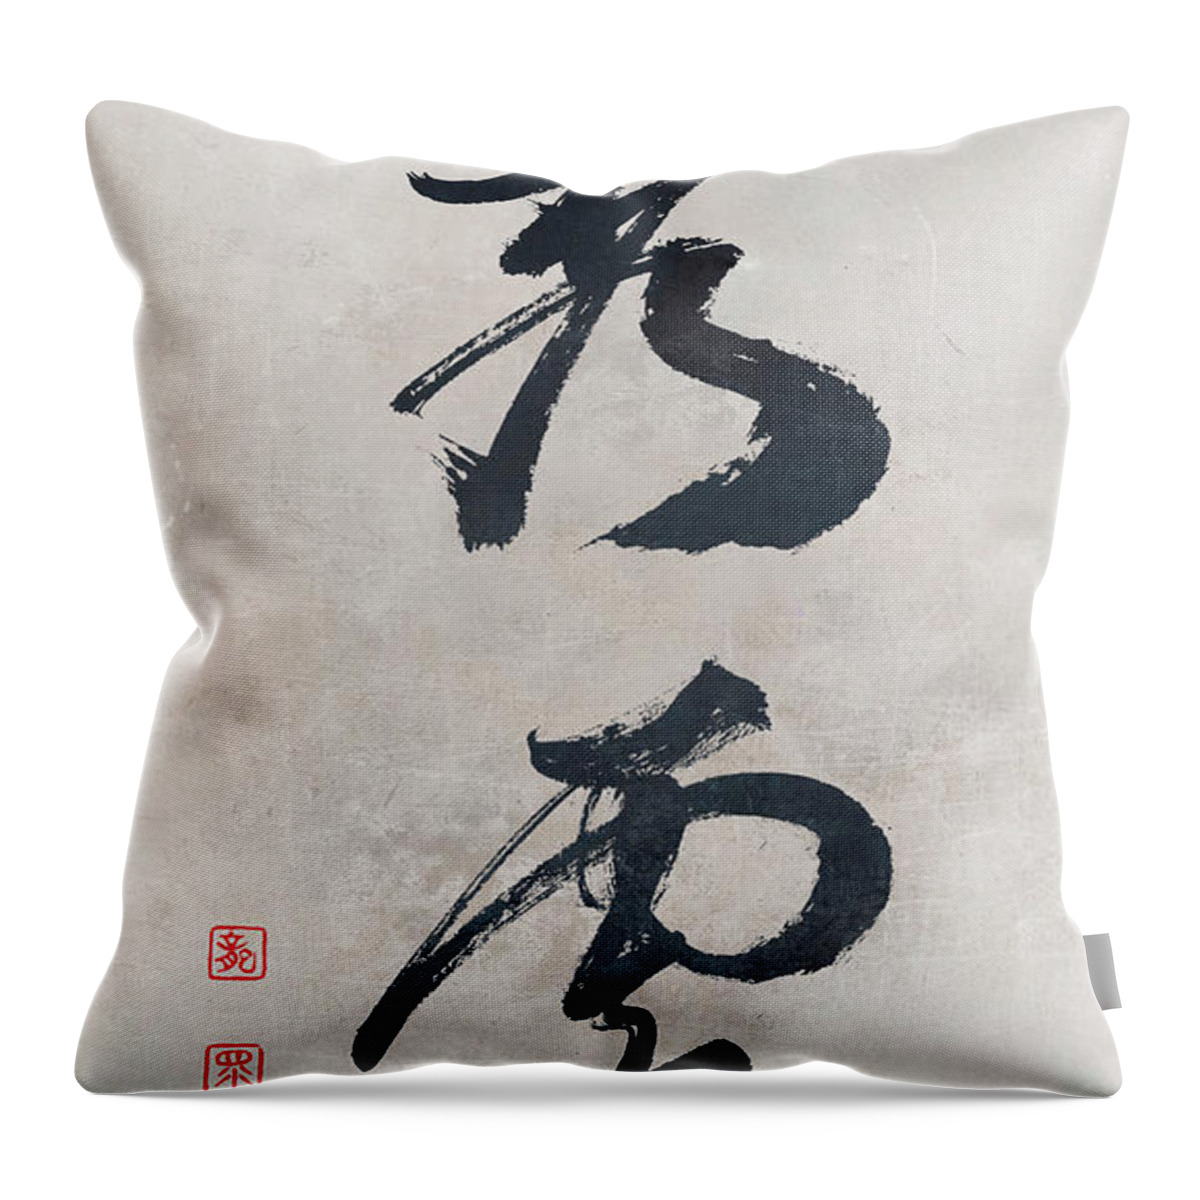 Japanese Calligraphy Throw Pillow featuring the painting Majestic Skies by Ponte Ryuurui